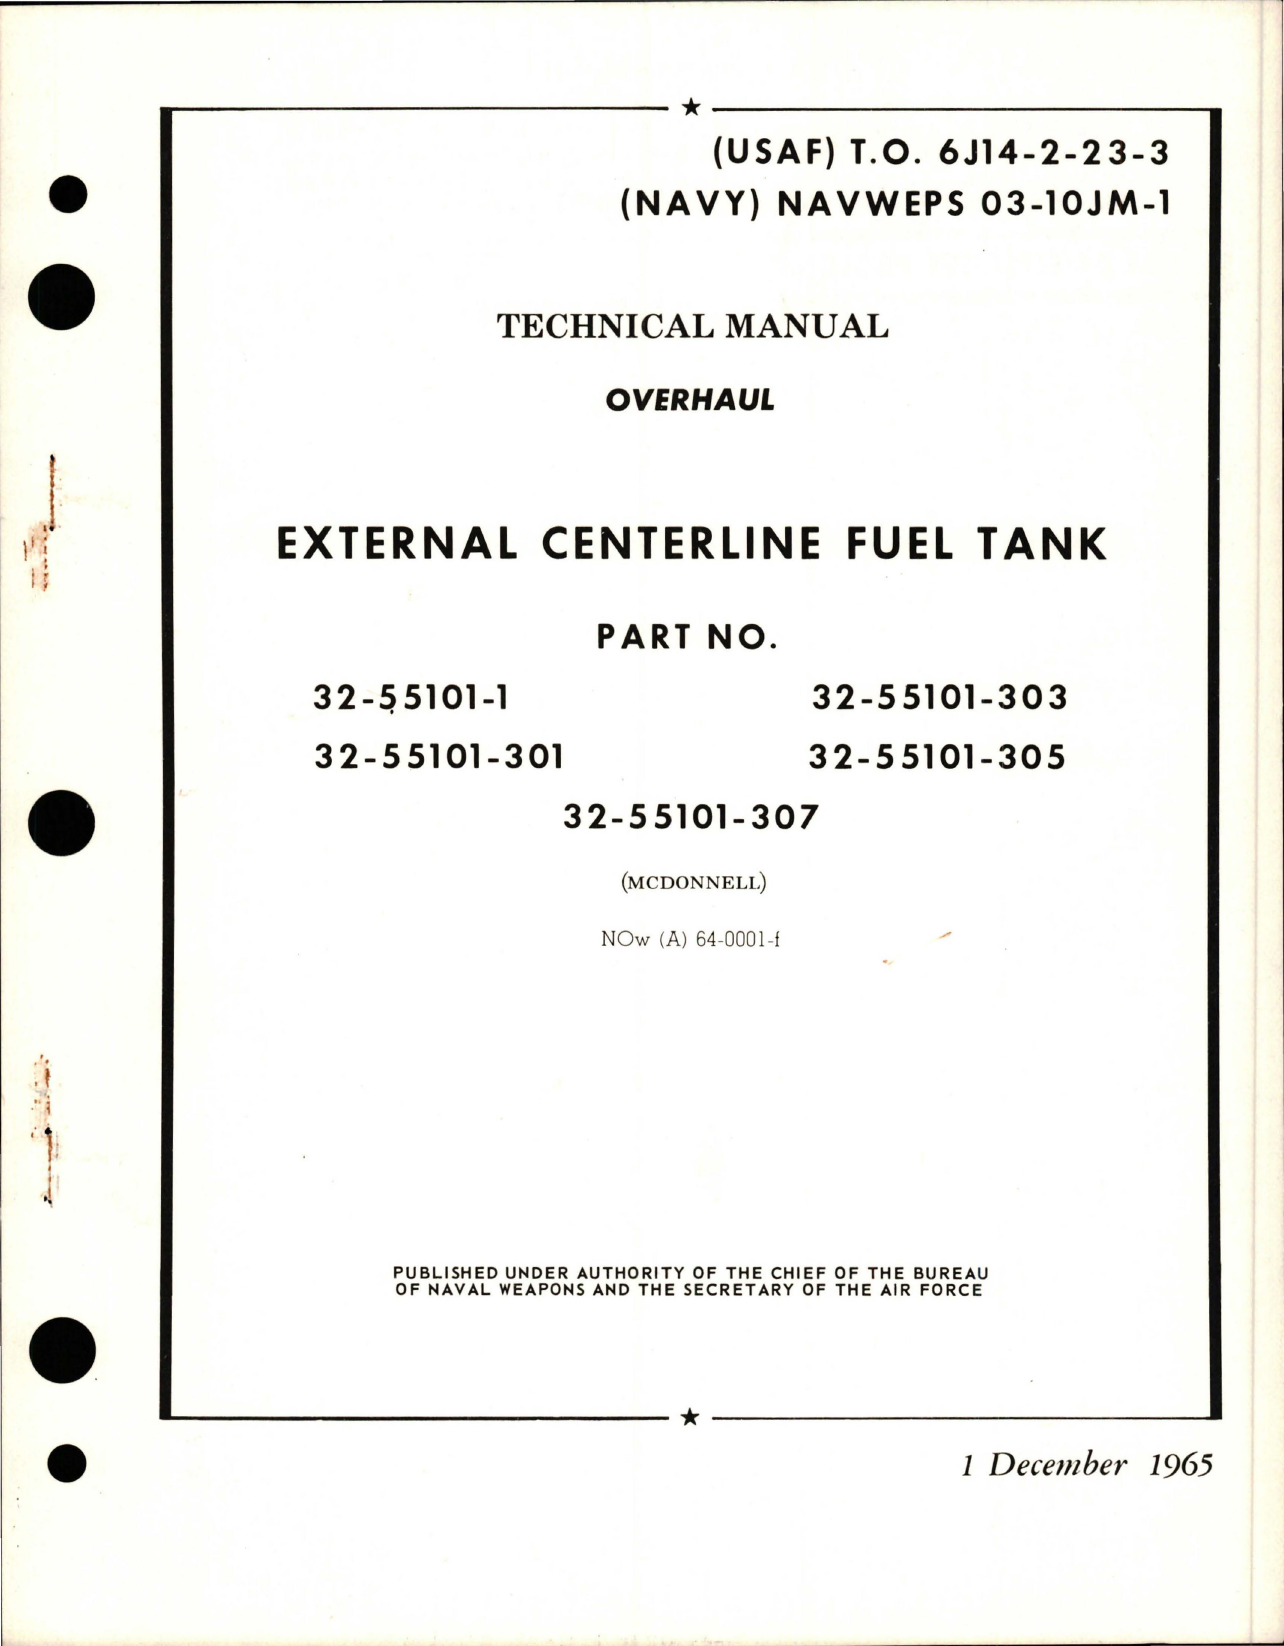 Sample page 1 from AirCorps Library document: Overhaul Manual for External Centerline Fuel Tank